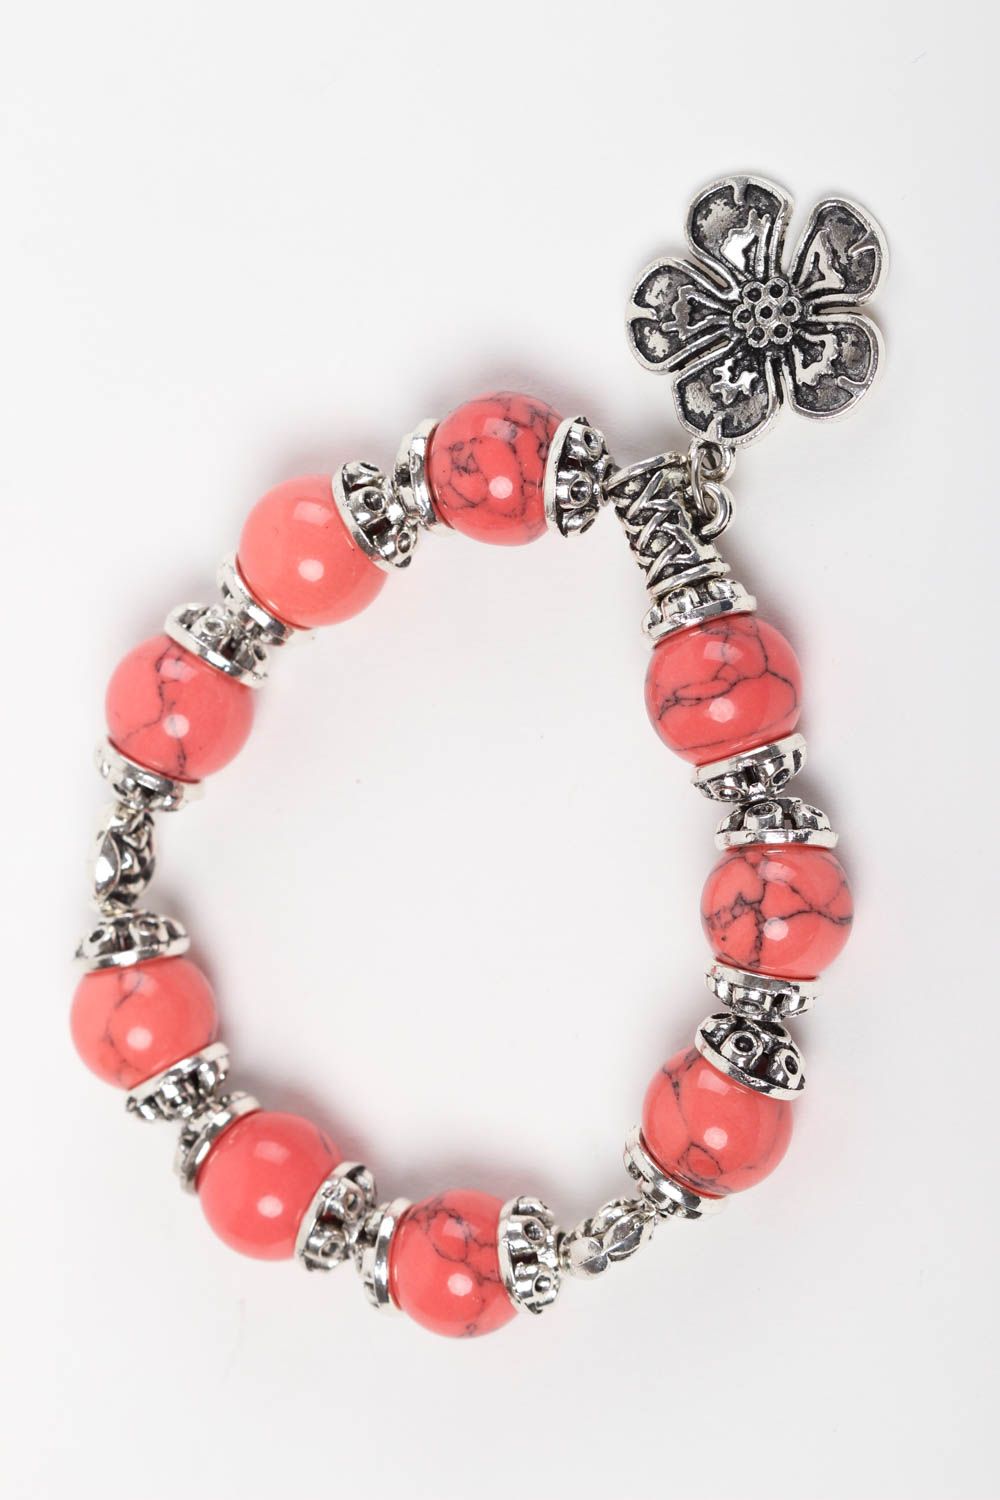 Vintage bracelet handmade coral bracelet jewelry with natural stones for women photo 2